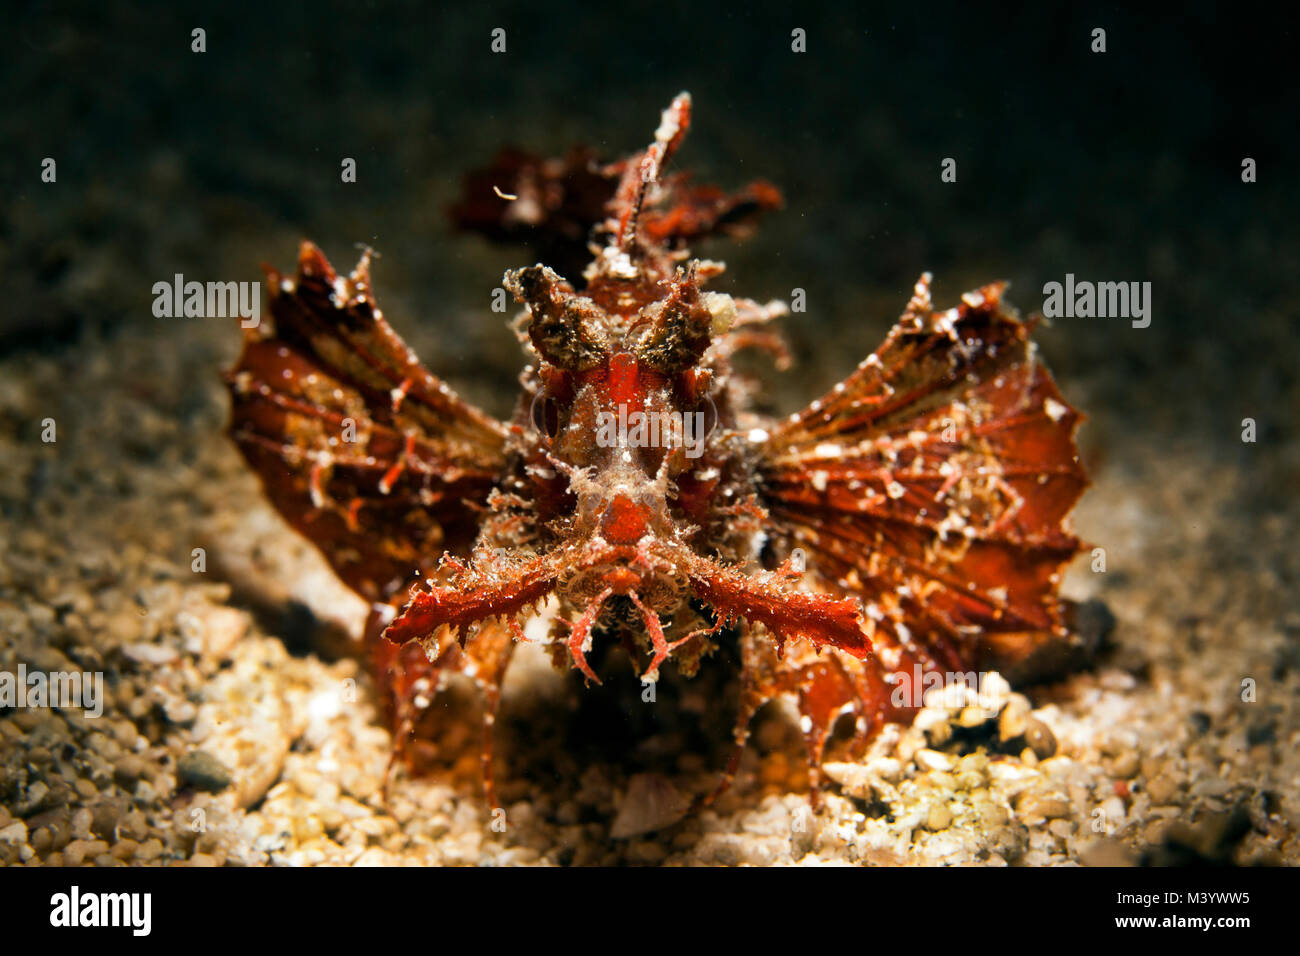 An ambon scorpionfish rests in the sand at Raja Ampat, Indonesia Stock Photo